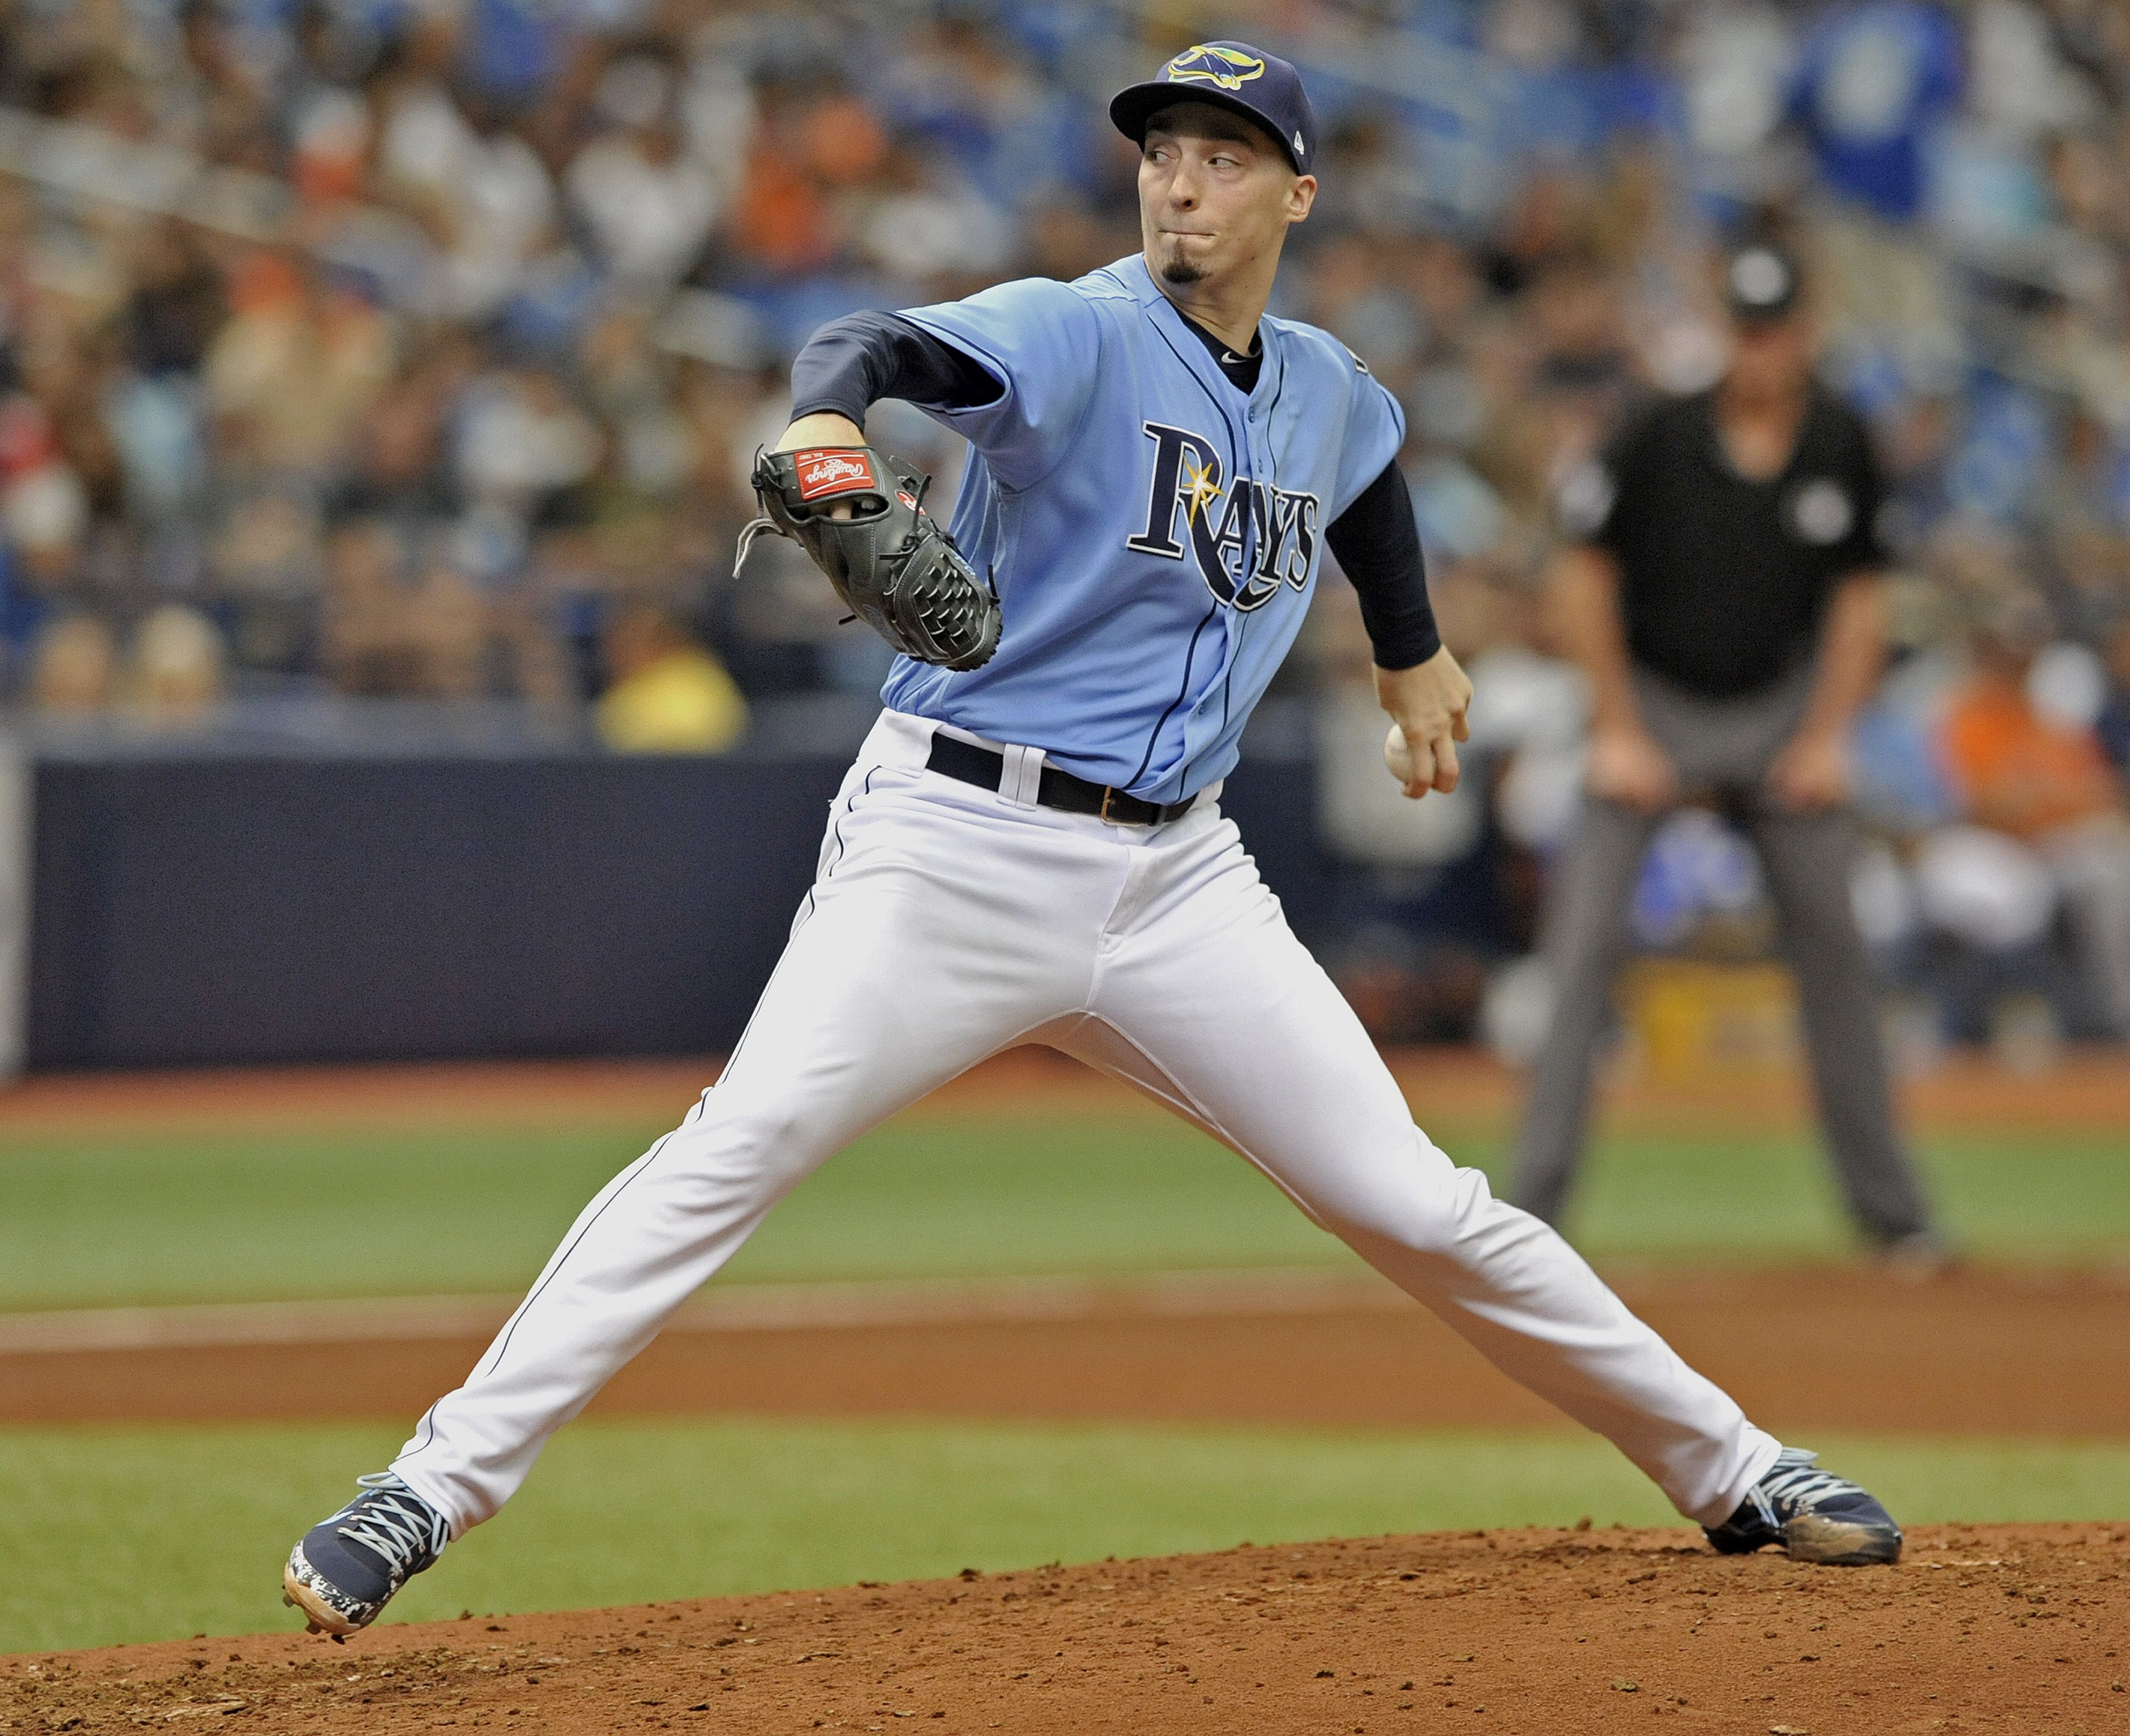 MLB All Star Game 2018: Blake Snell, Jed Lowire Among True Roster Snubs